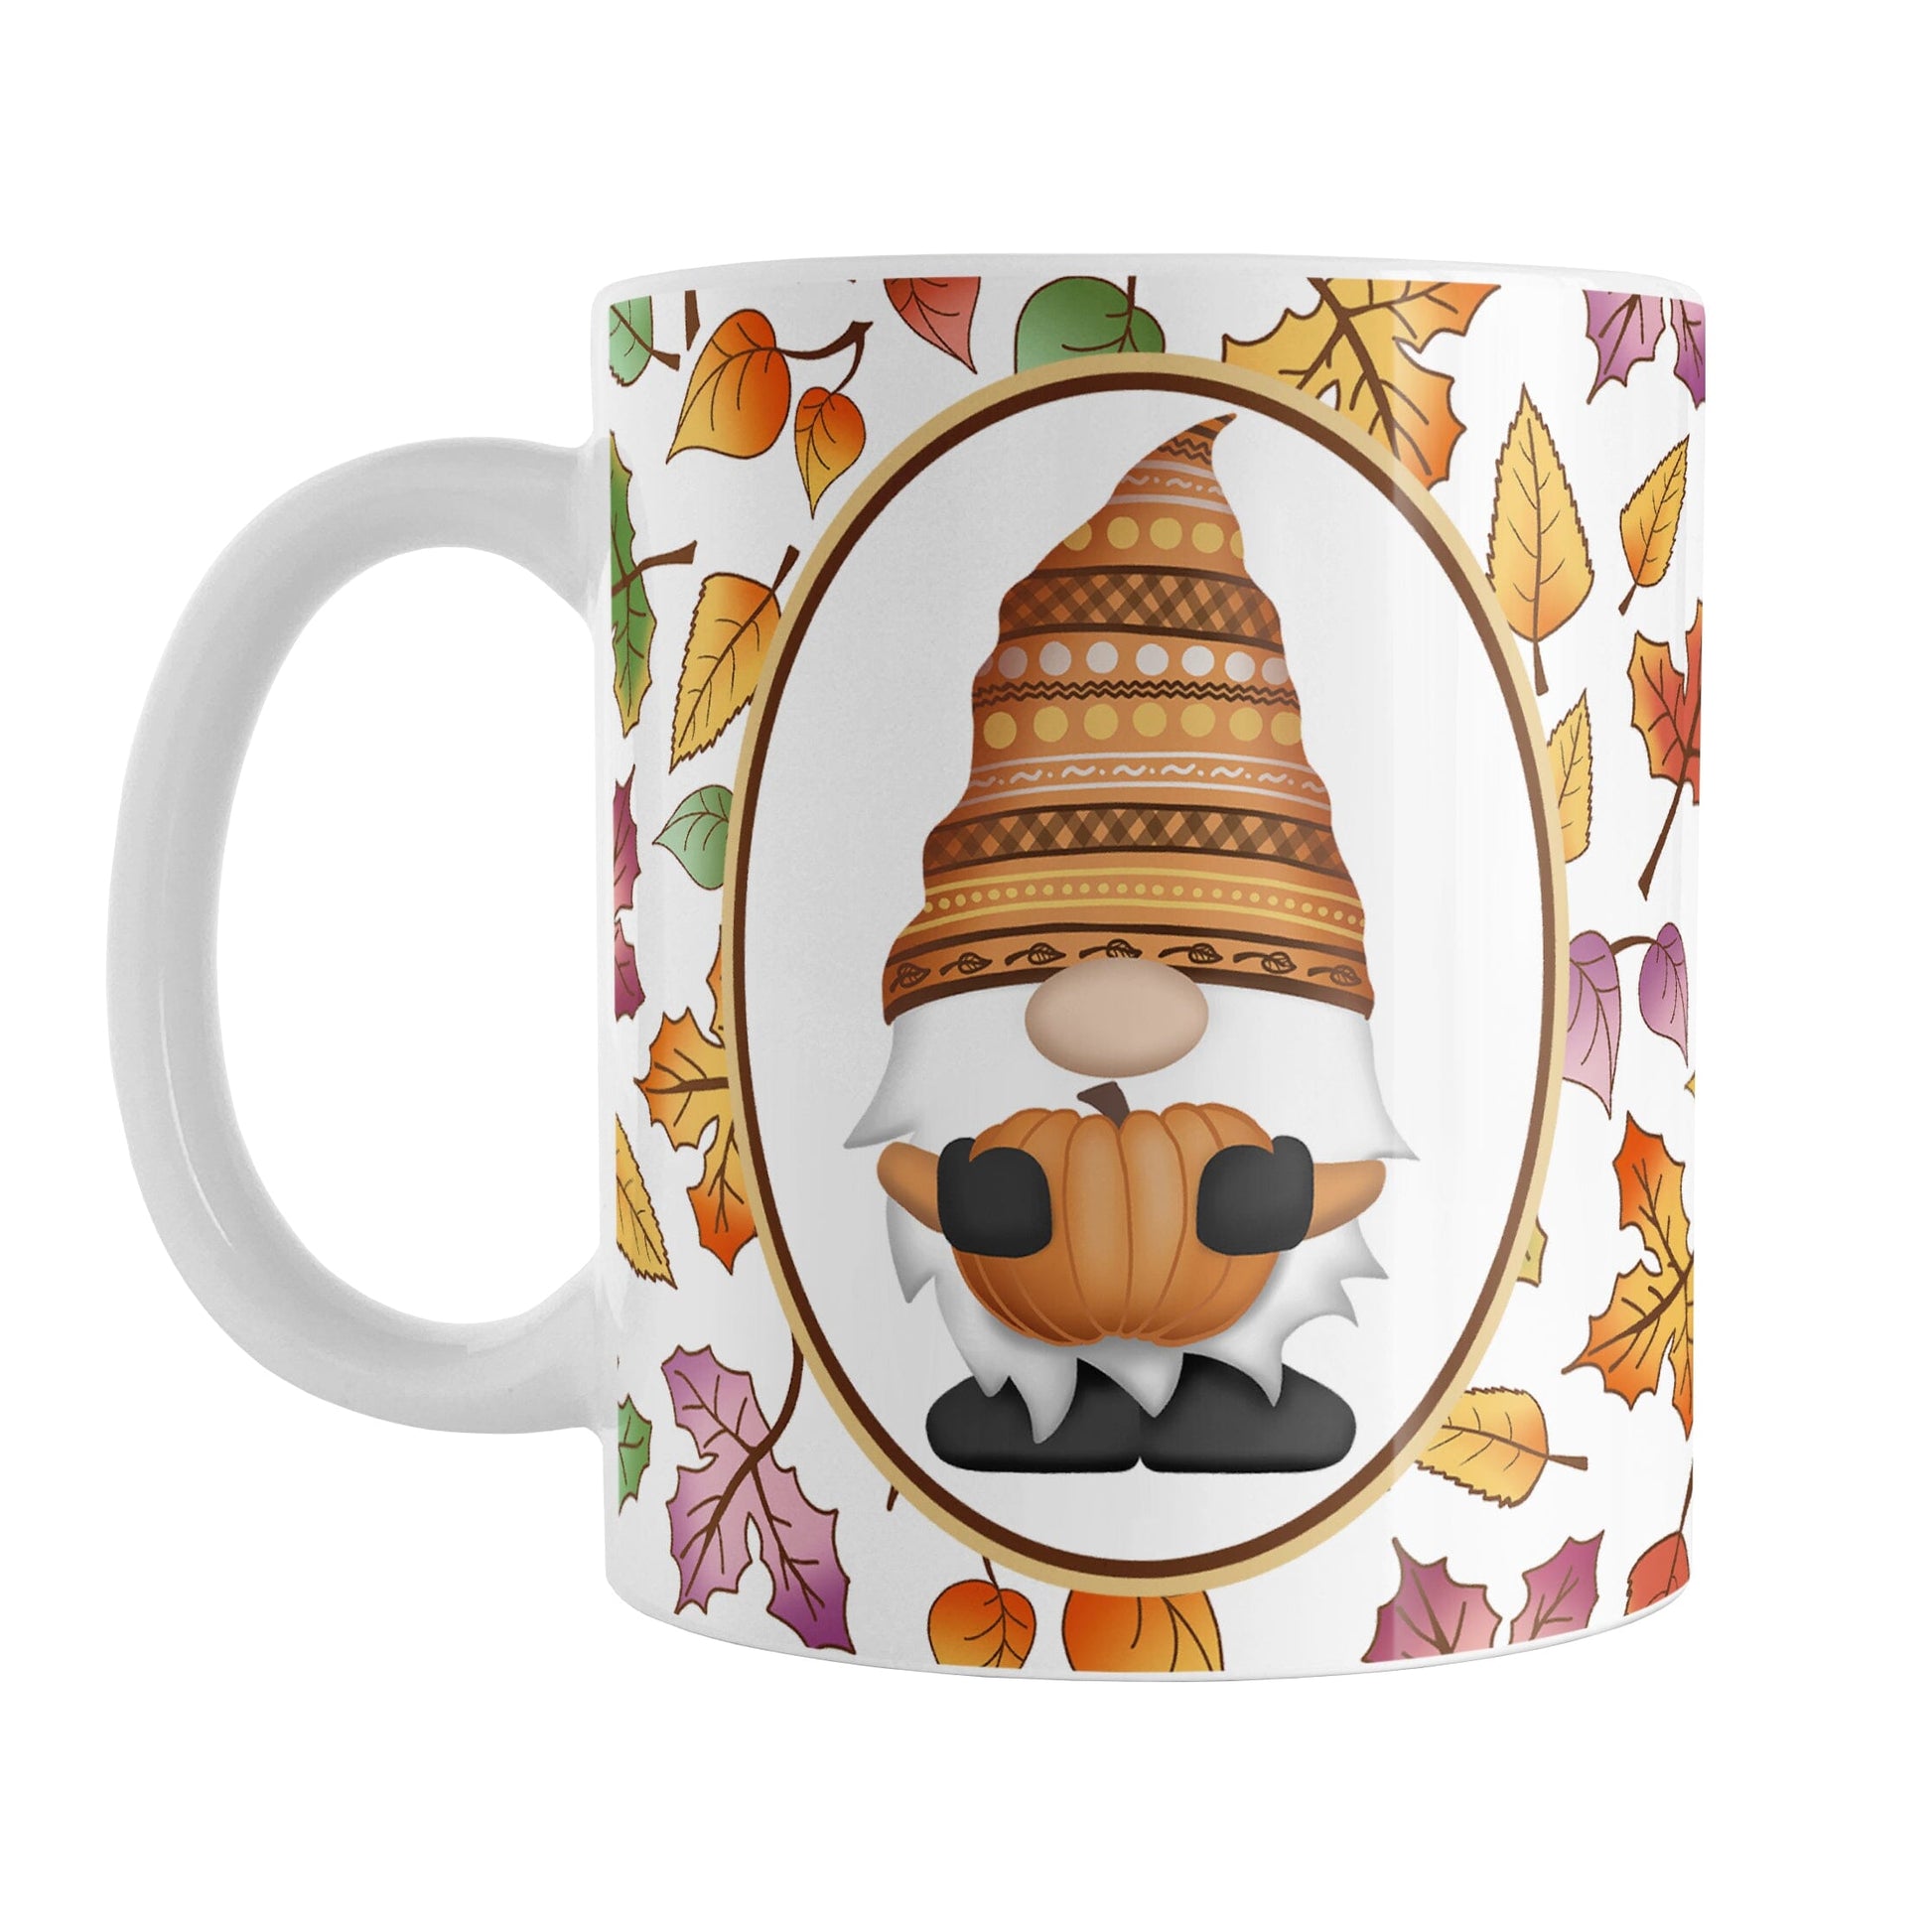 Orange Gnome Fall Leaves Mug (11oz) at Amy's Coffee Mugs. A ceramic coffee mug designed with an adorable orange hat gnome holding an orange pumpkin in a white oval over a pattern of leaves in different fall colors that wrap around the mug to the handle.